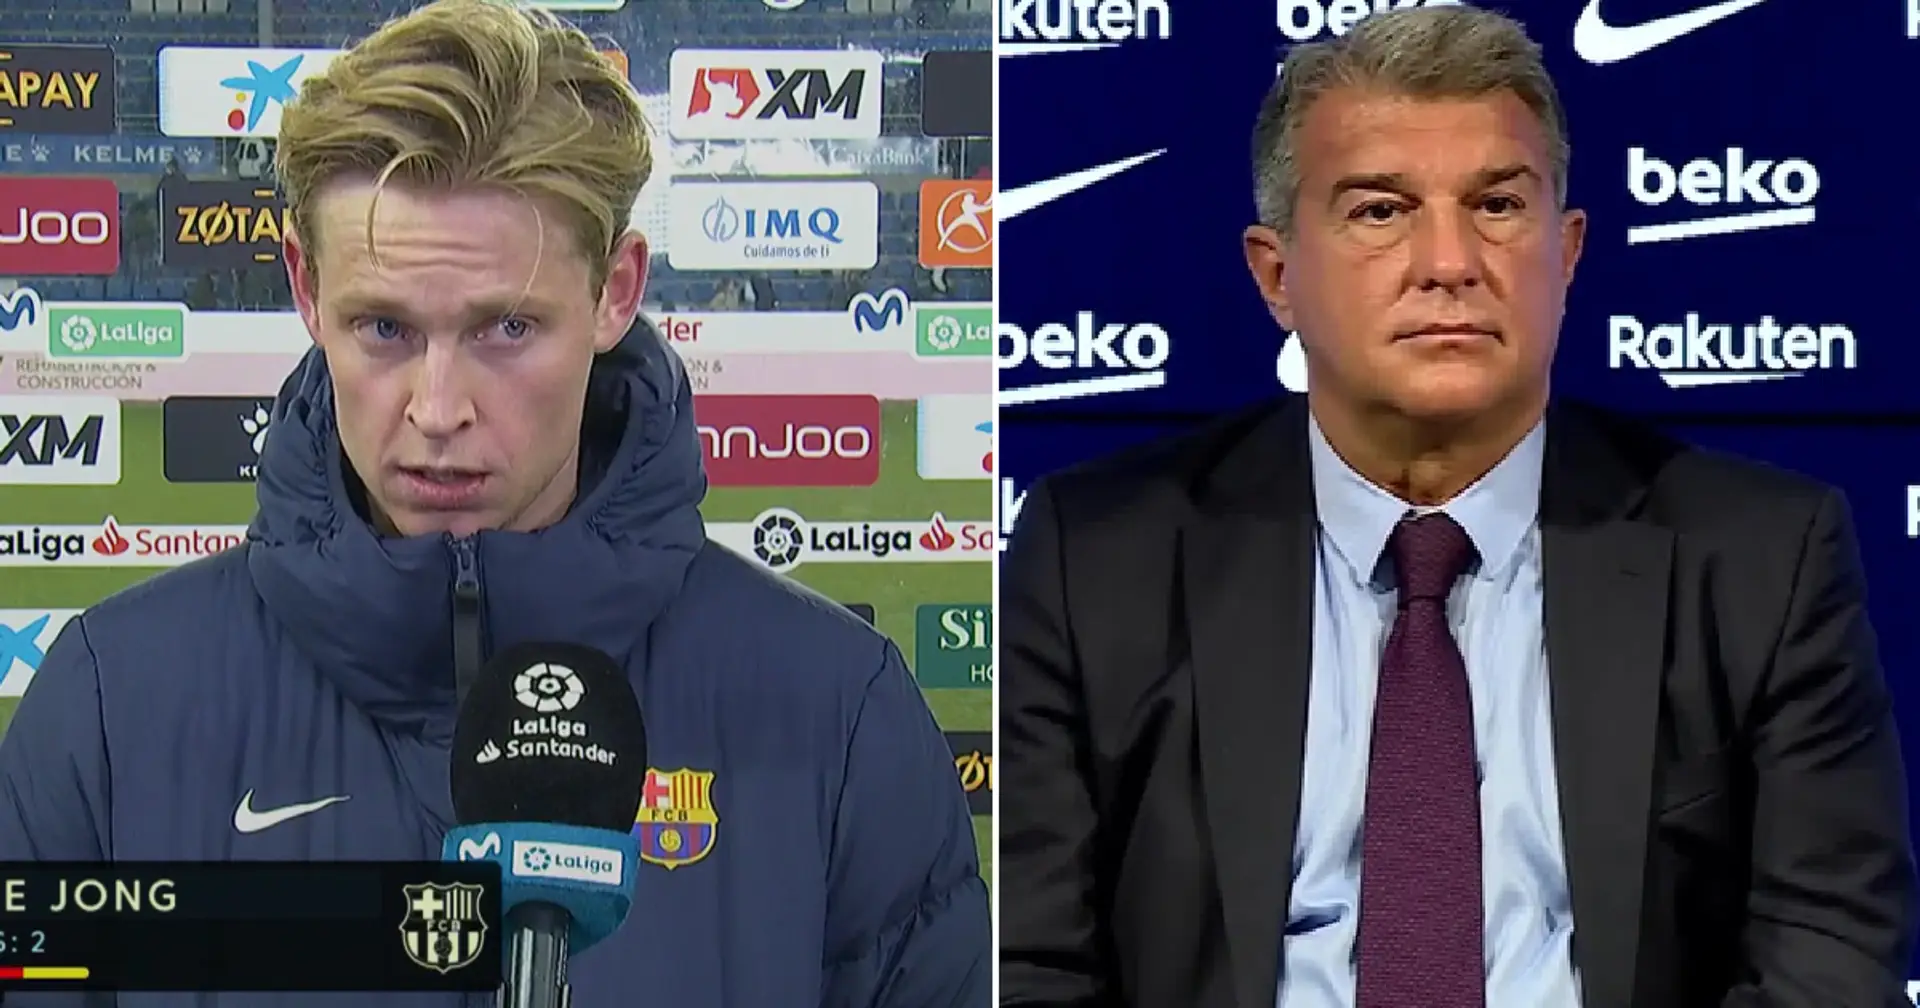 'I'm sorry': Frenkie completely disagrees with Laporta in post-match interview 